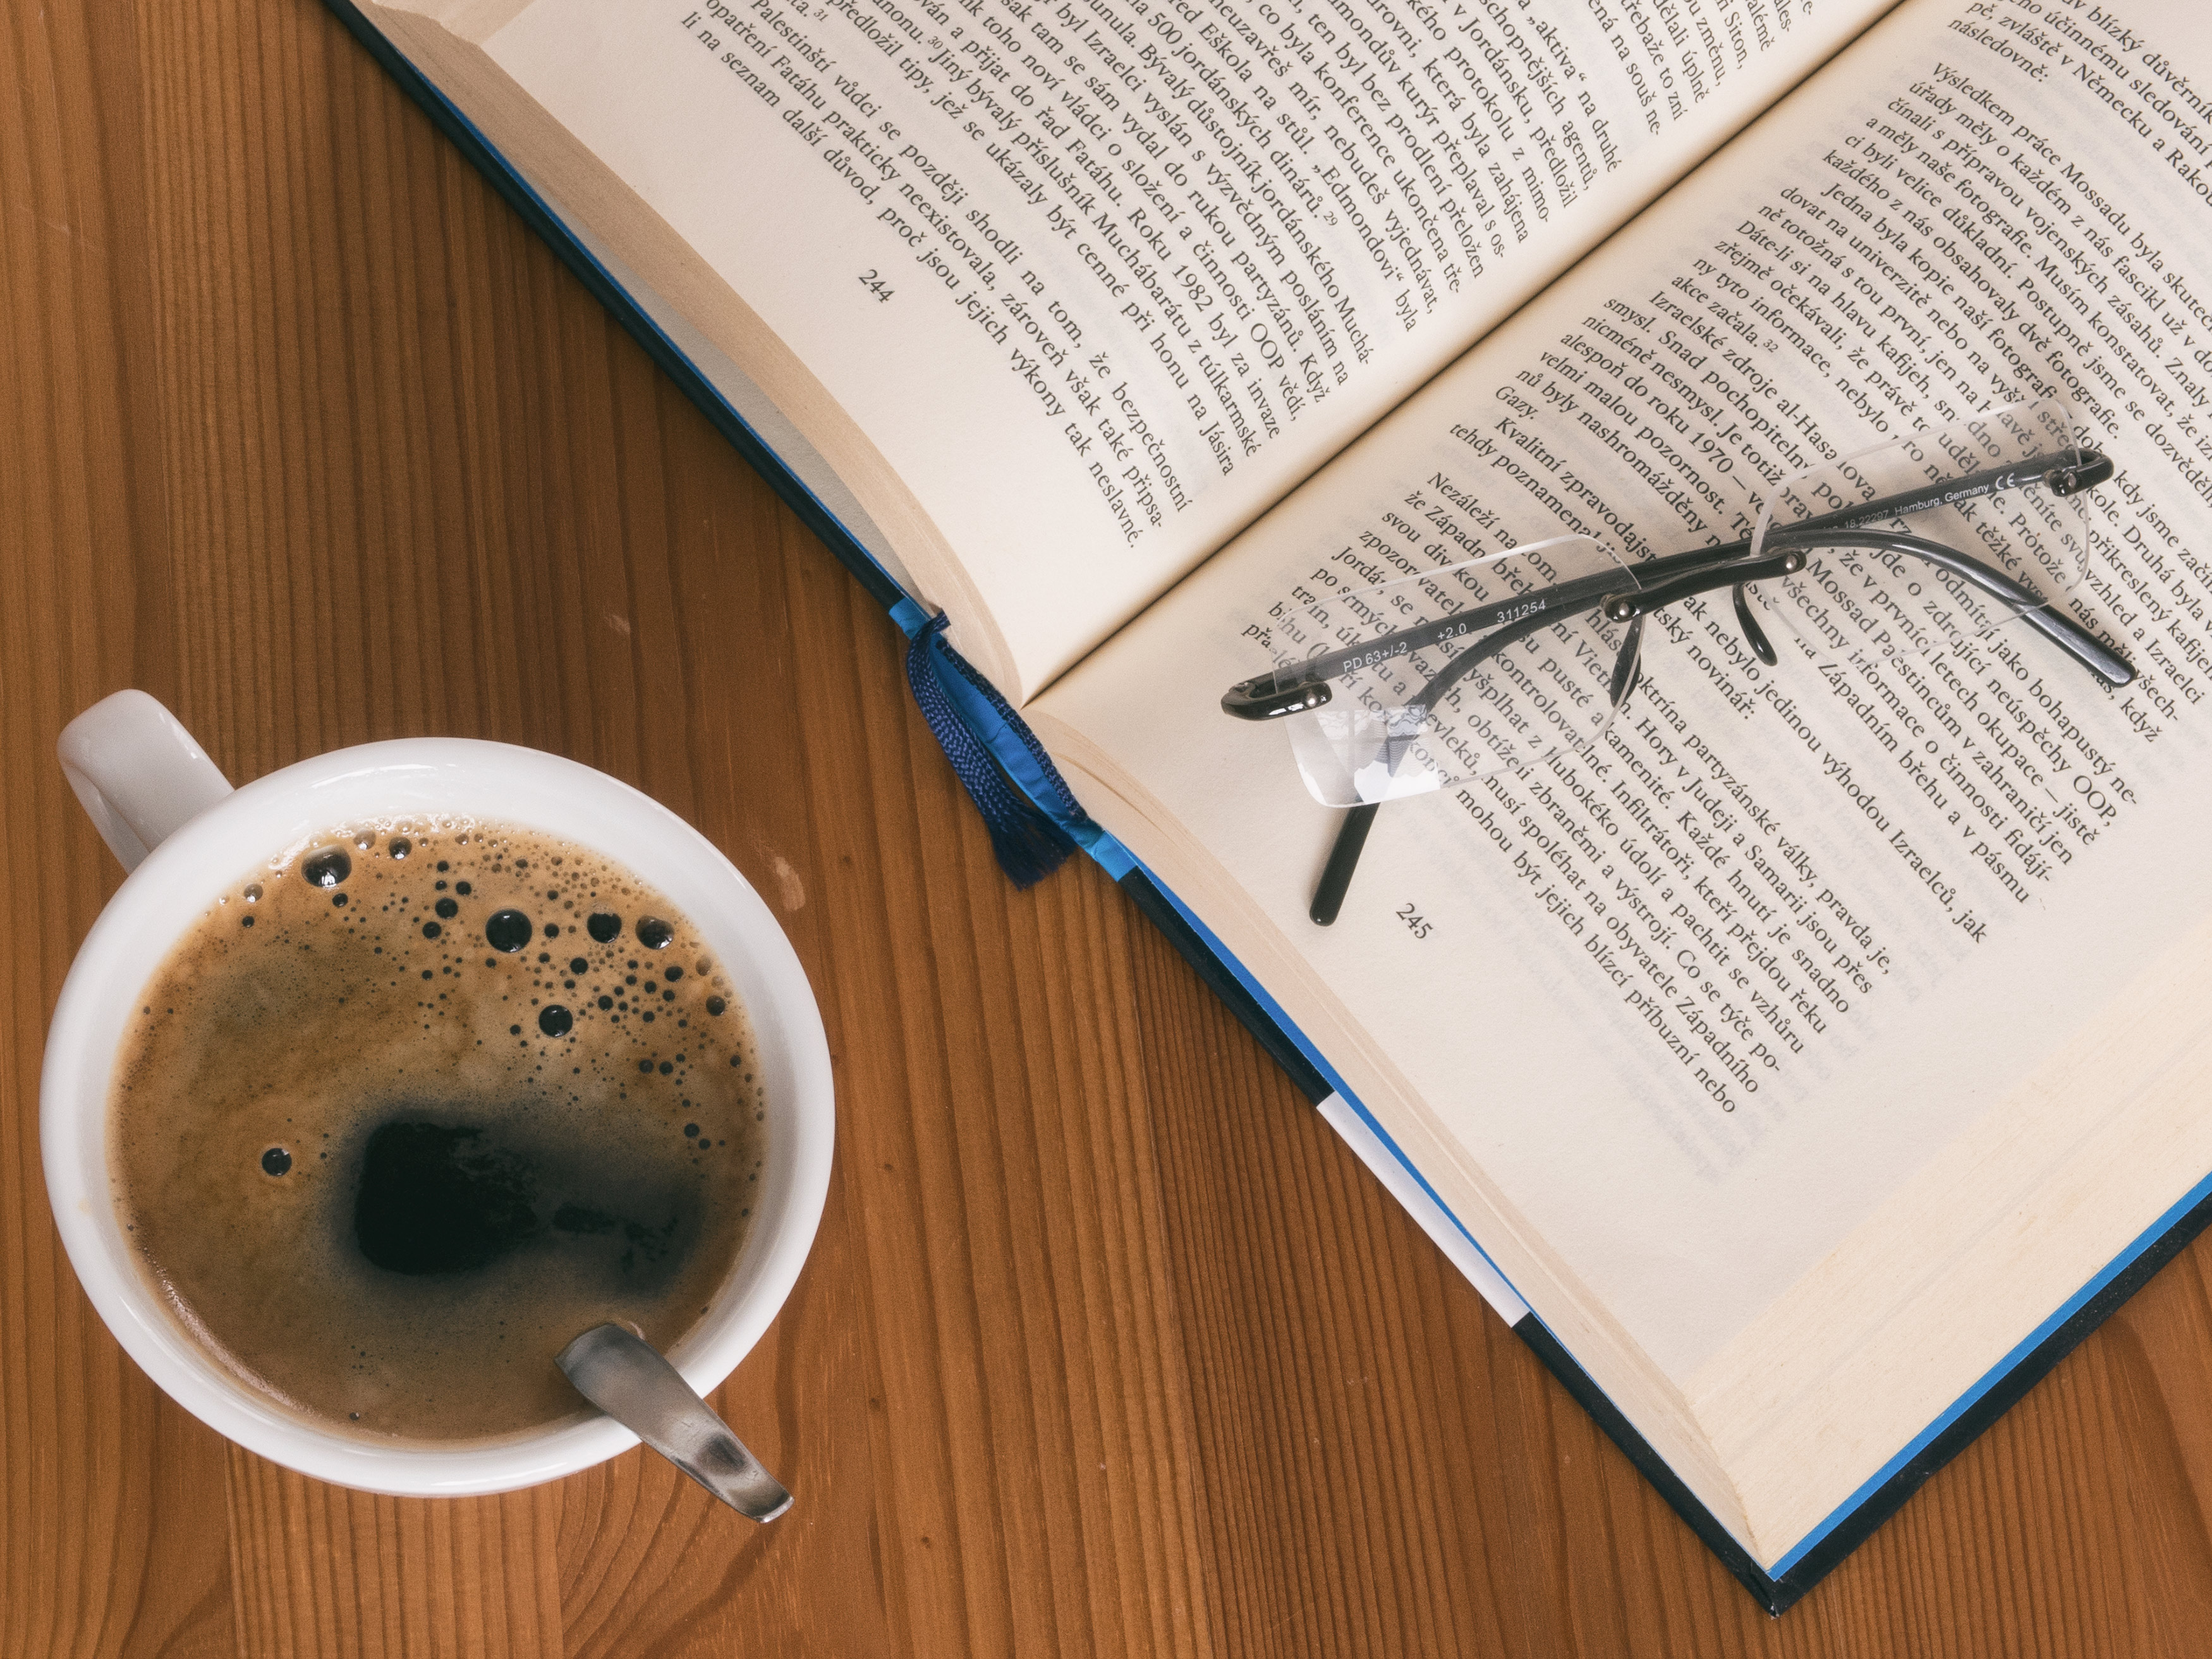 Free Image: Book, Coffee And Glasses | Libreshot Public Domain Photos